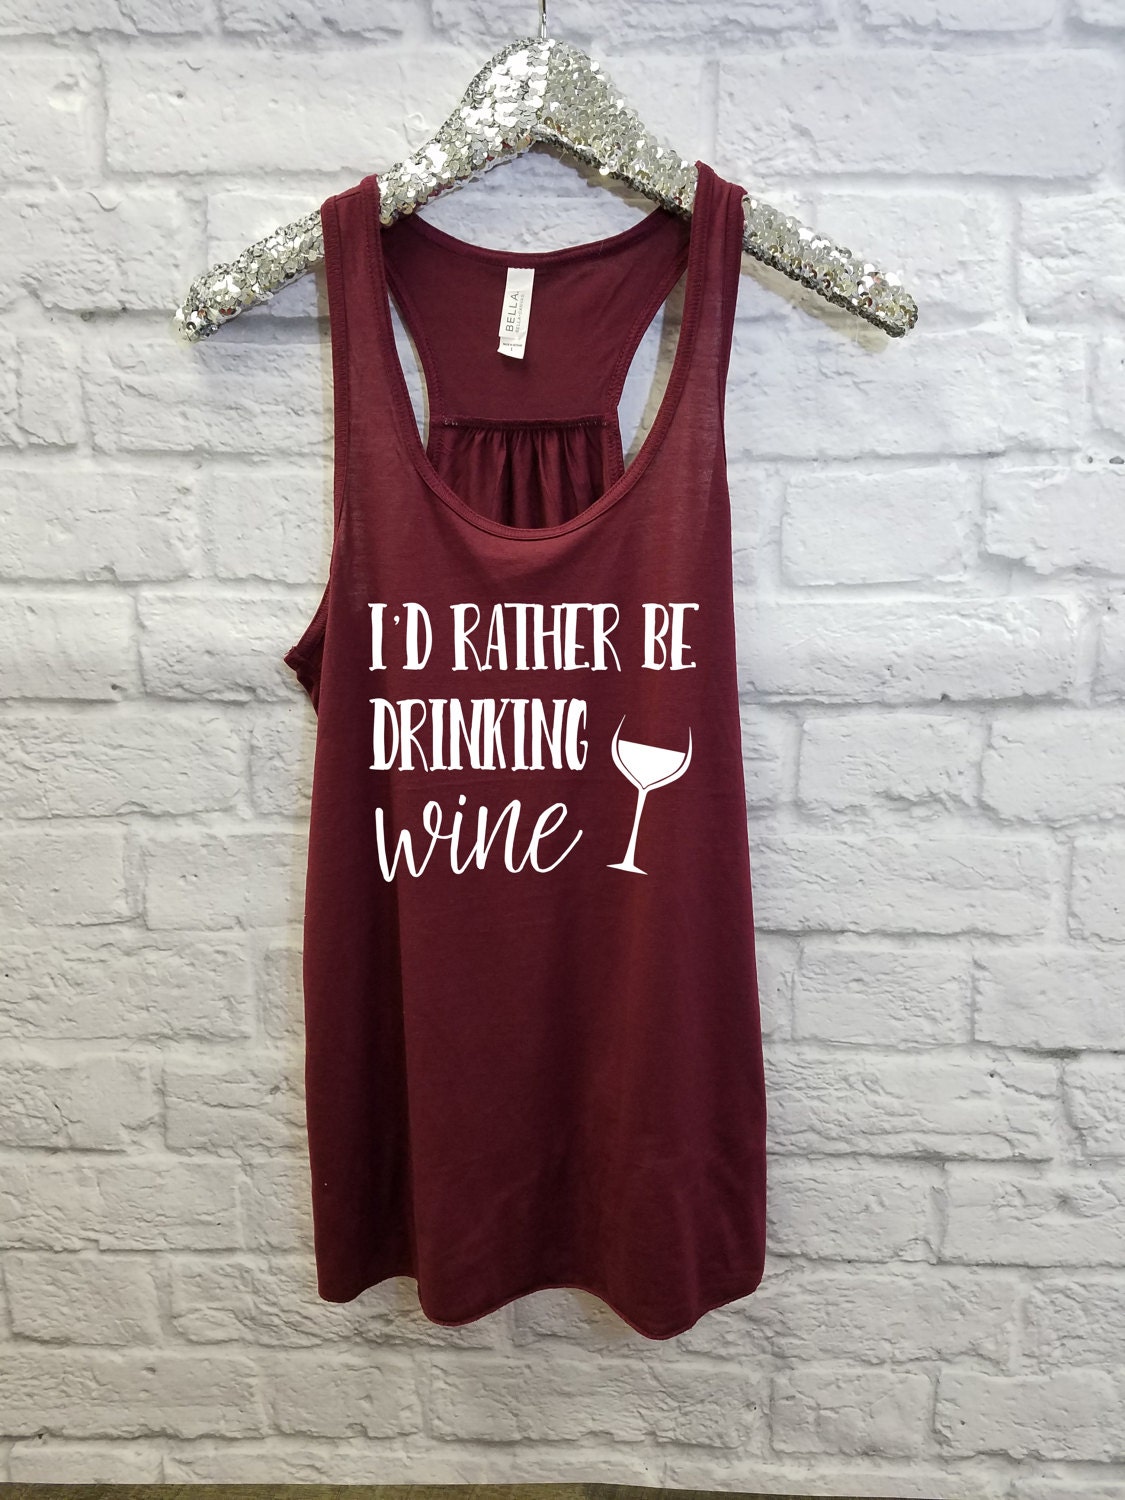 I'd Rather Be Drinking Wine, Funny Wink Tank, Drink Wine Shirt